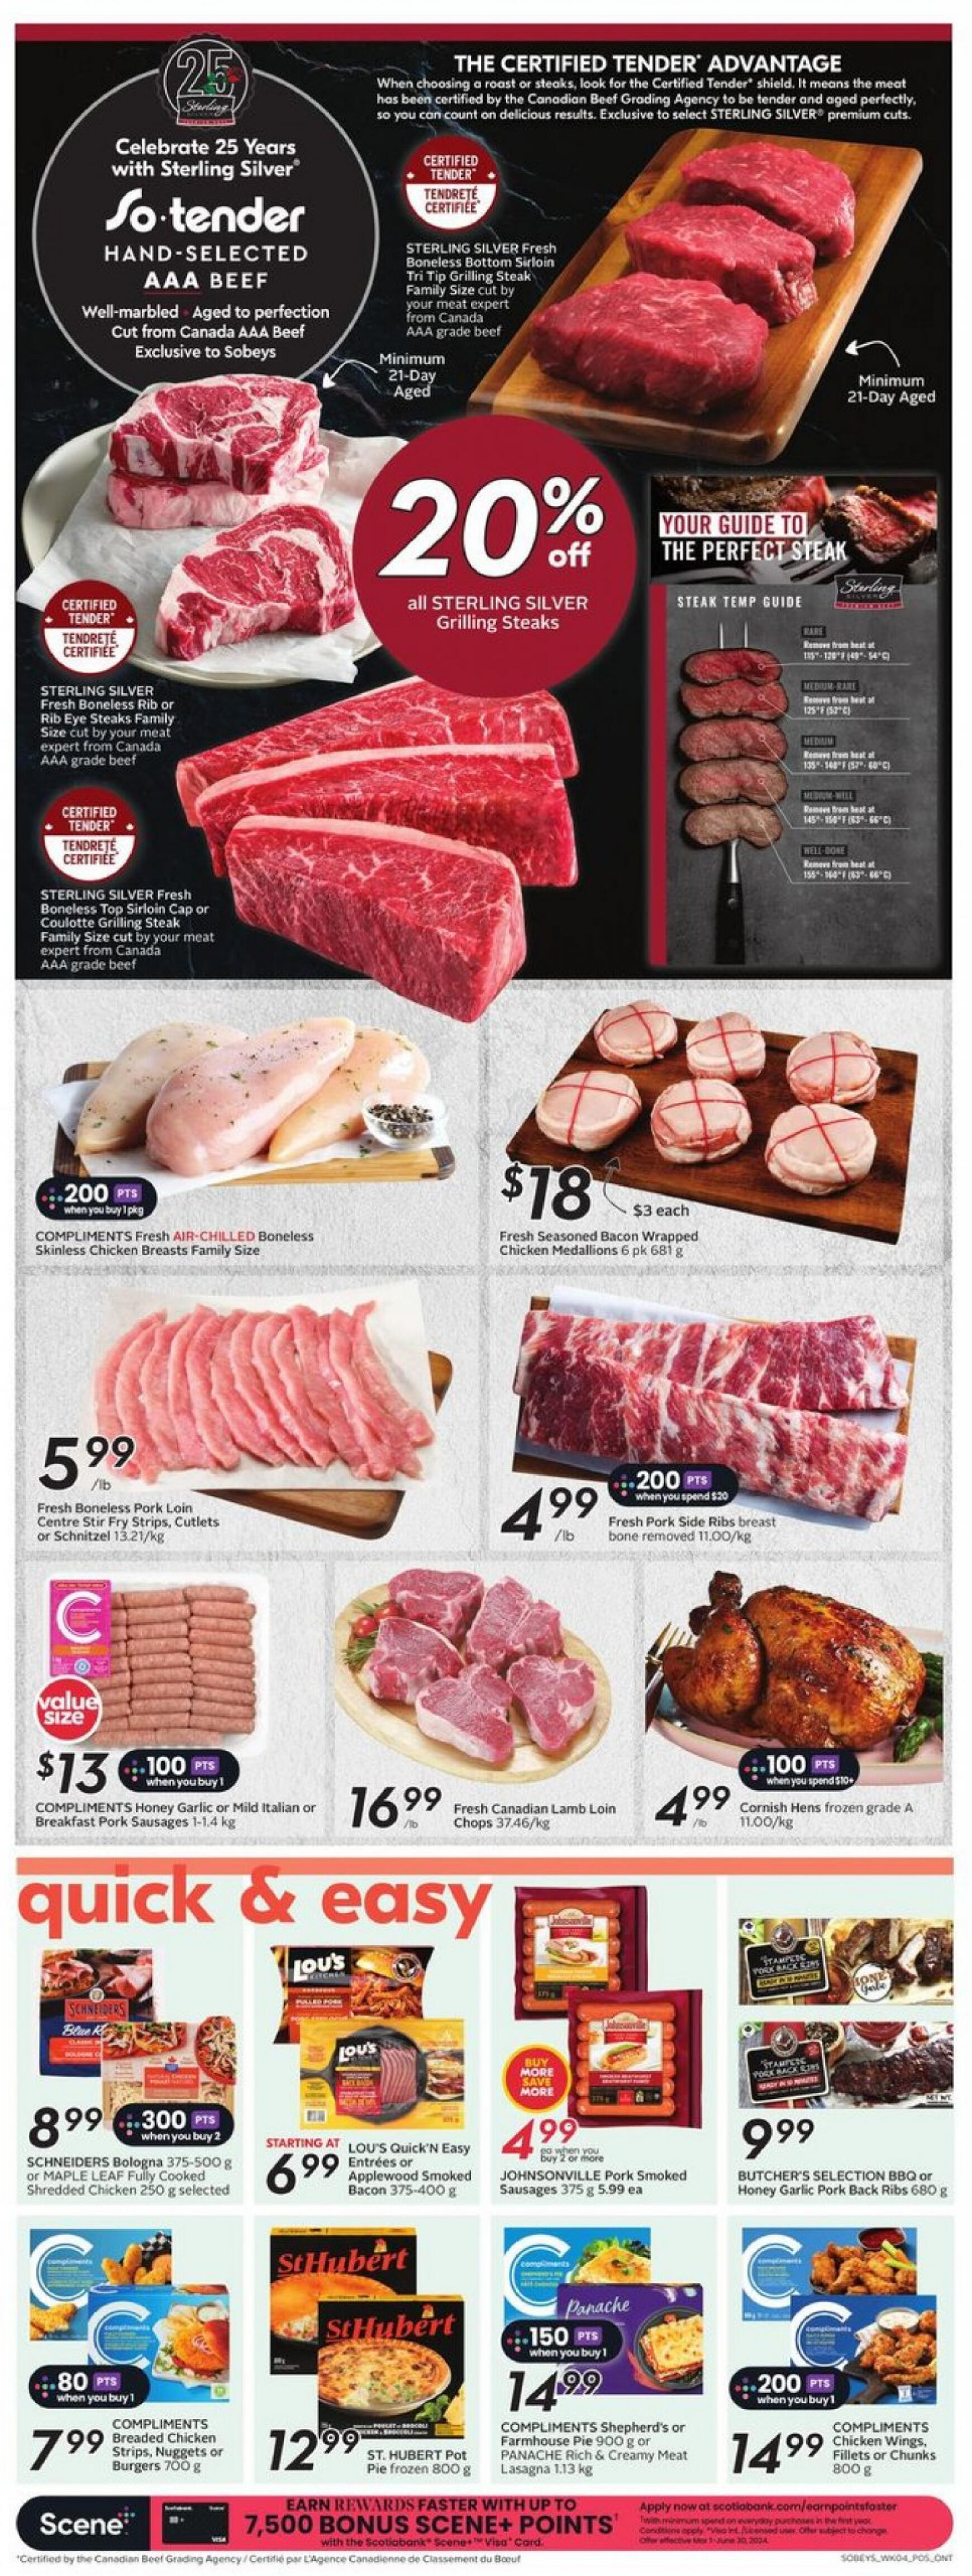 sobeys - Sobeys - Weekly Flyer - Ontario flyer current 23.05. - 29.05. - page: 10